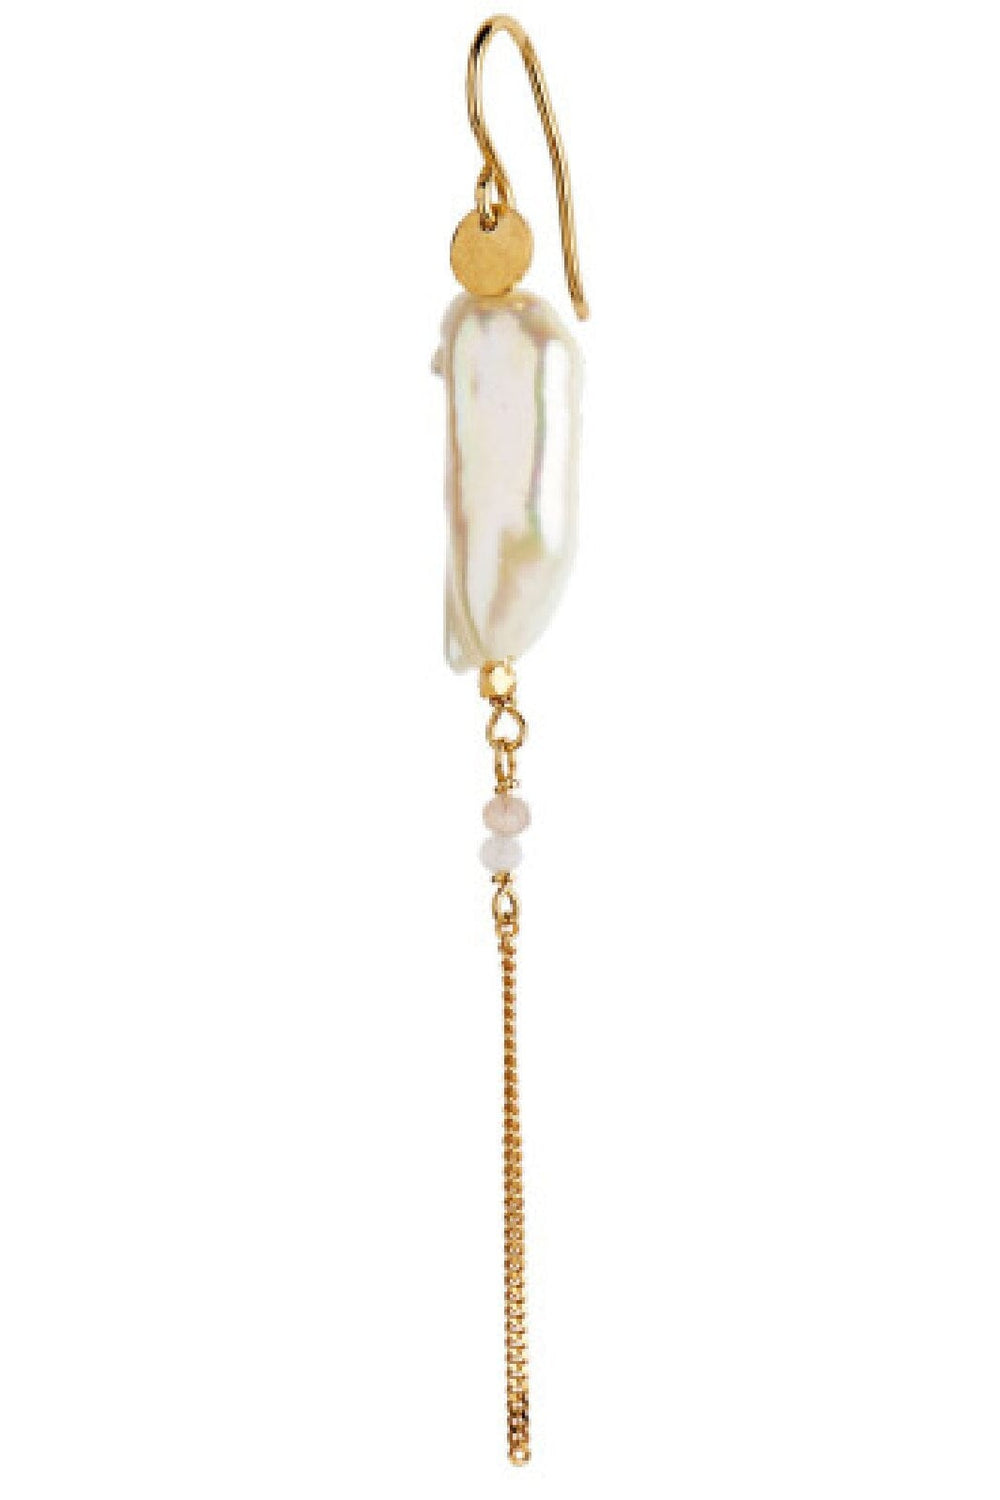 Stine A - Long Baroque Pearl With Chain Earring White Sorbet - 1268-02-S Øreringe 